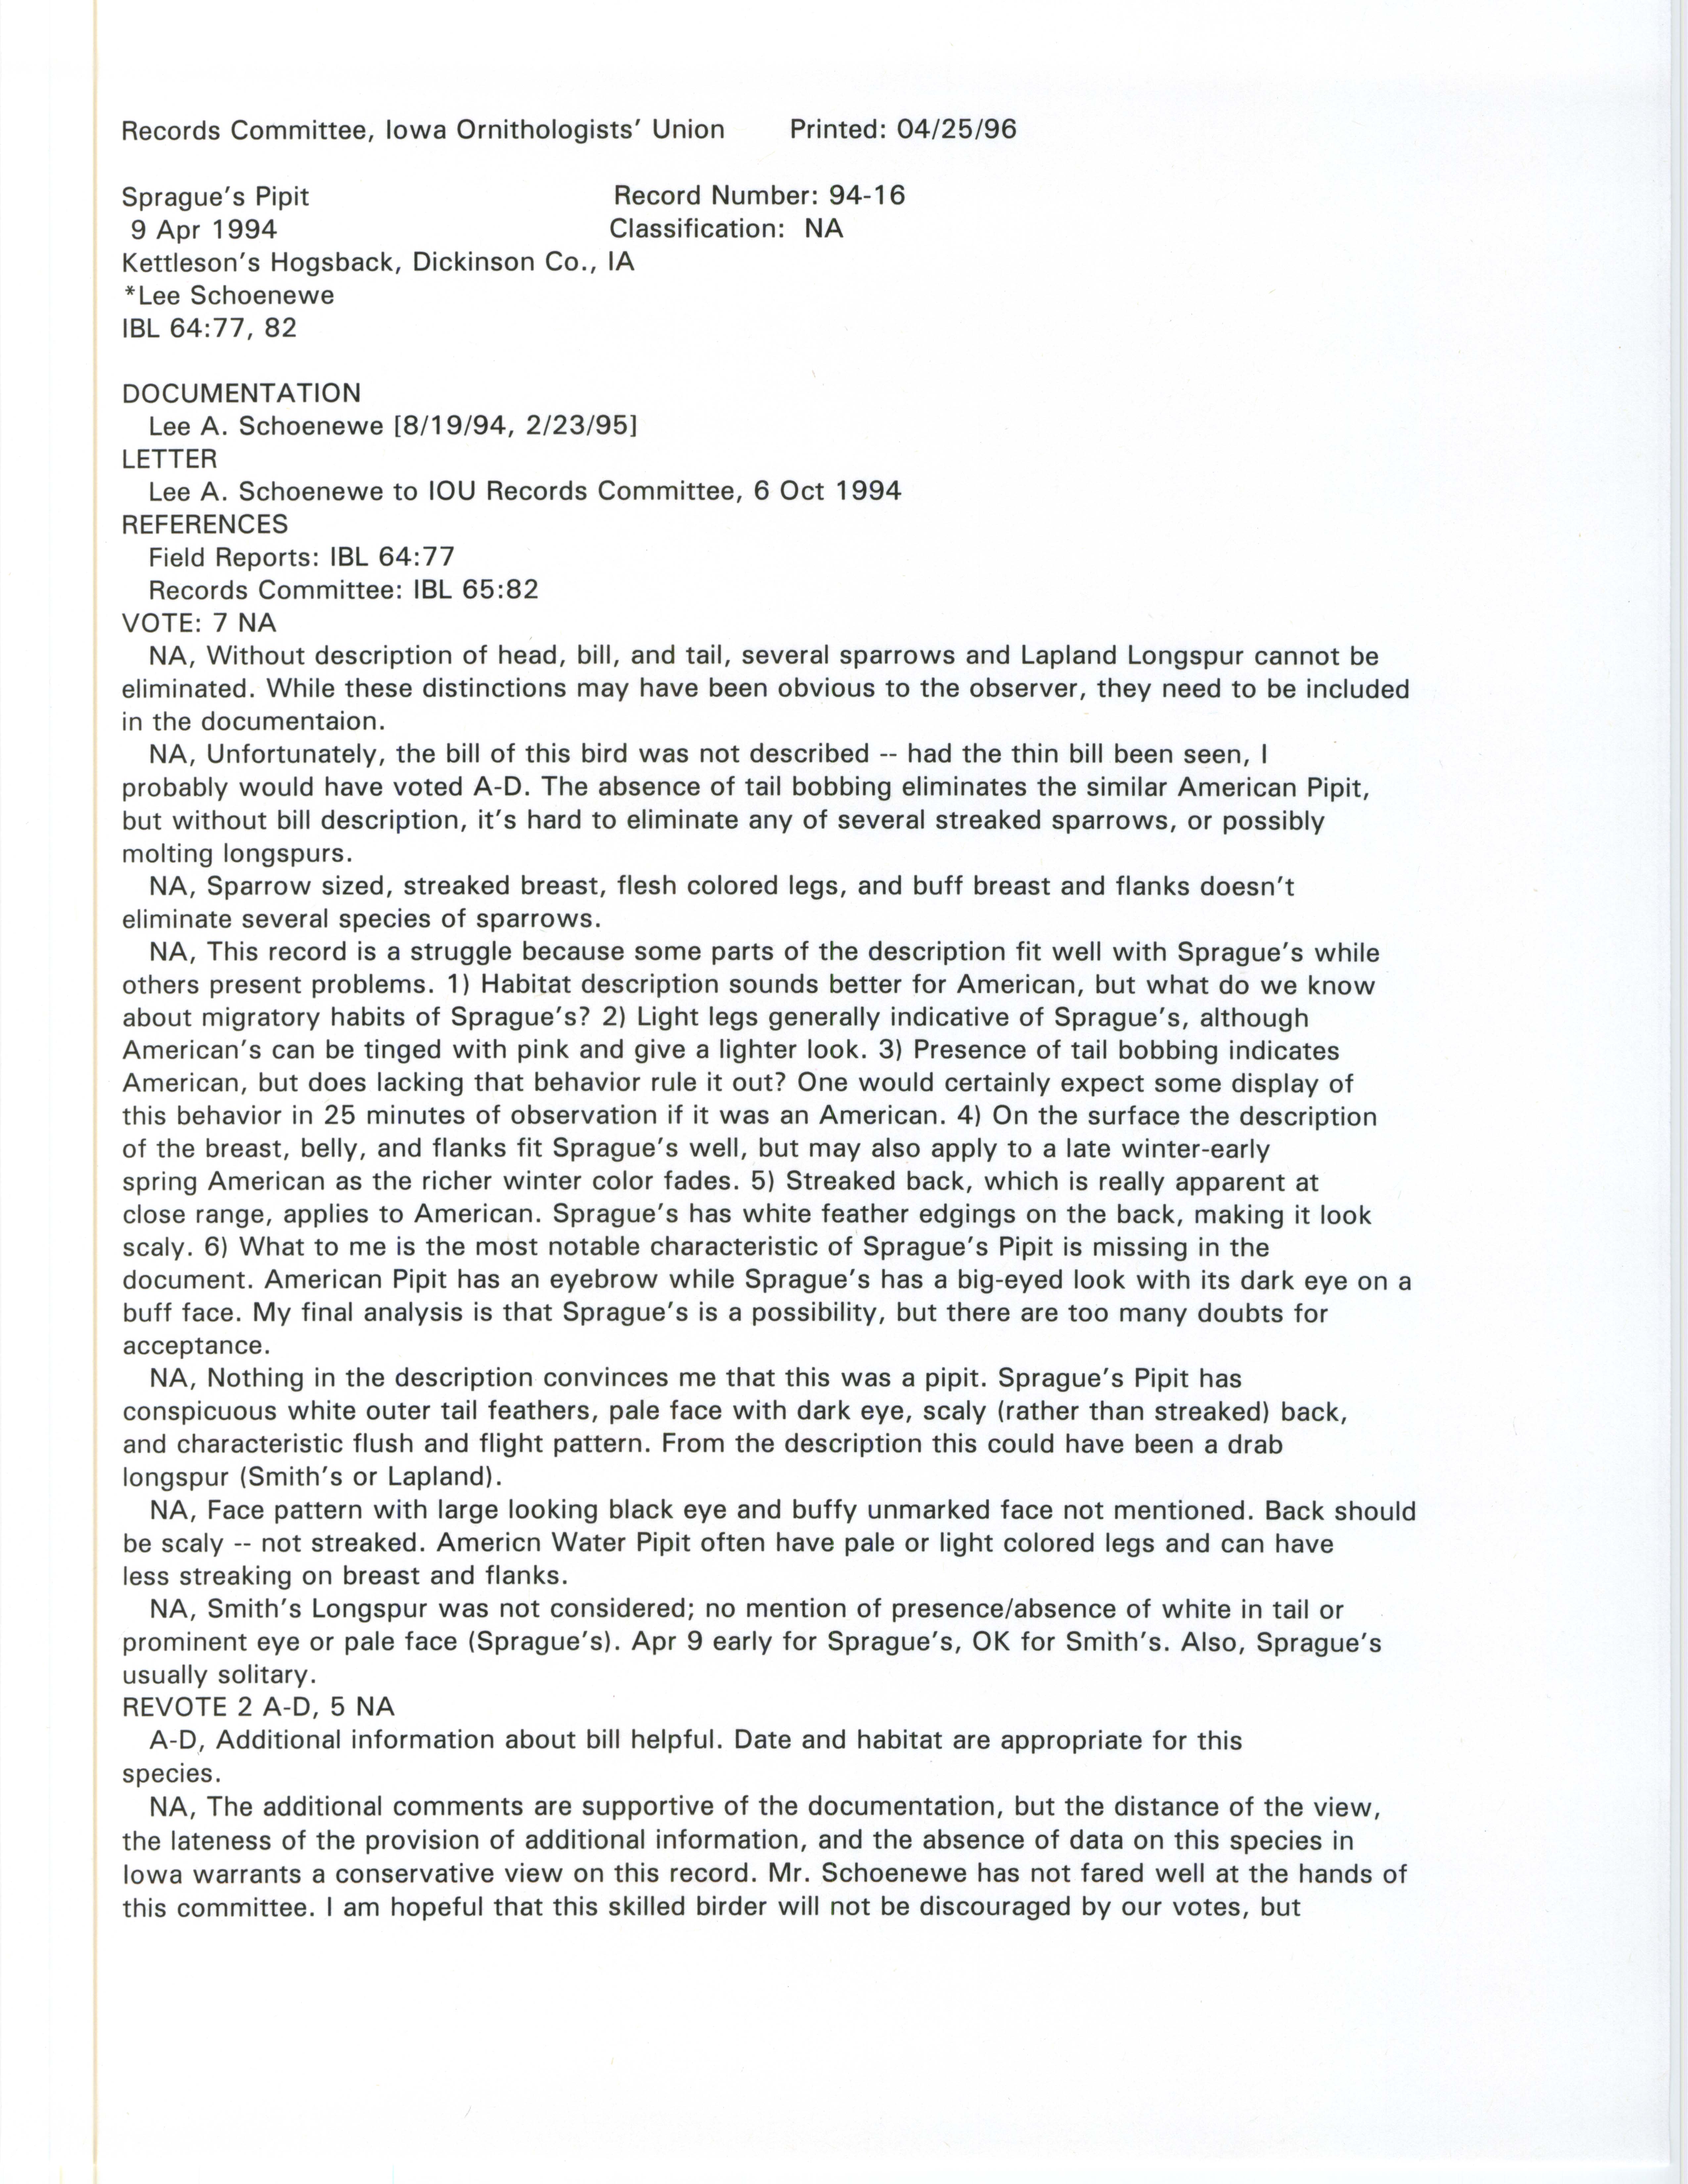 Records Committee review for rare bird sighting for Sprague's Pipit at Kettleson's Hogback Wildlife Management Area, 1994